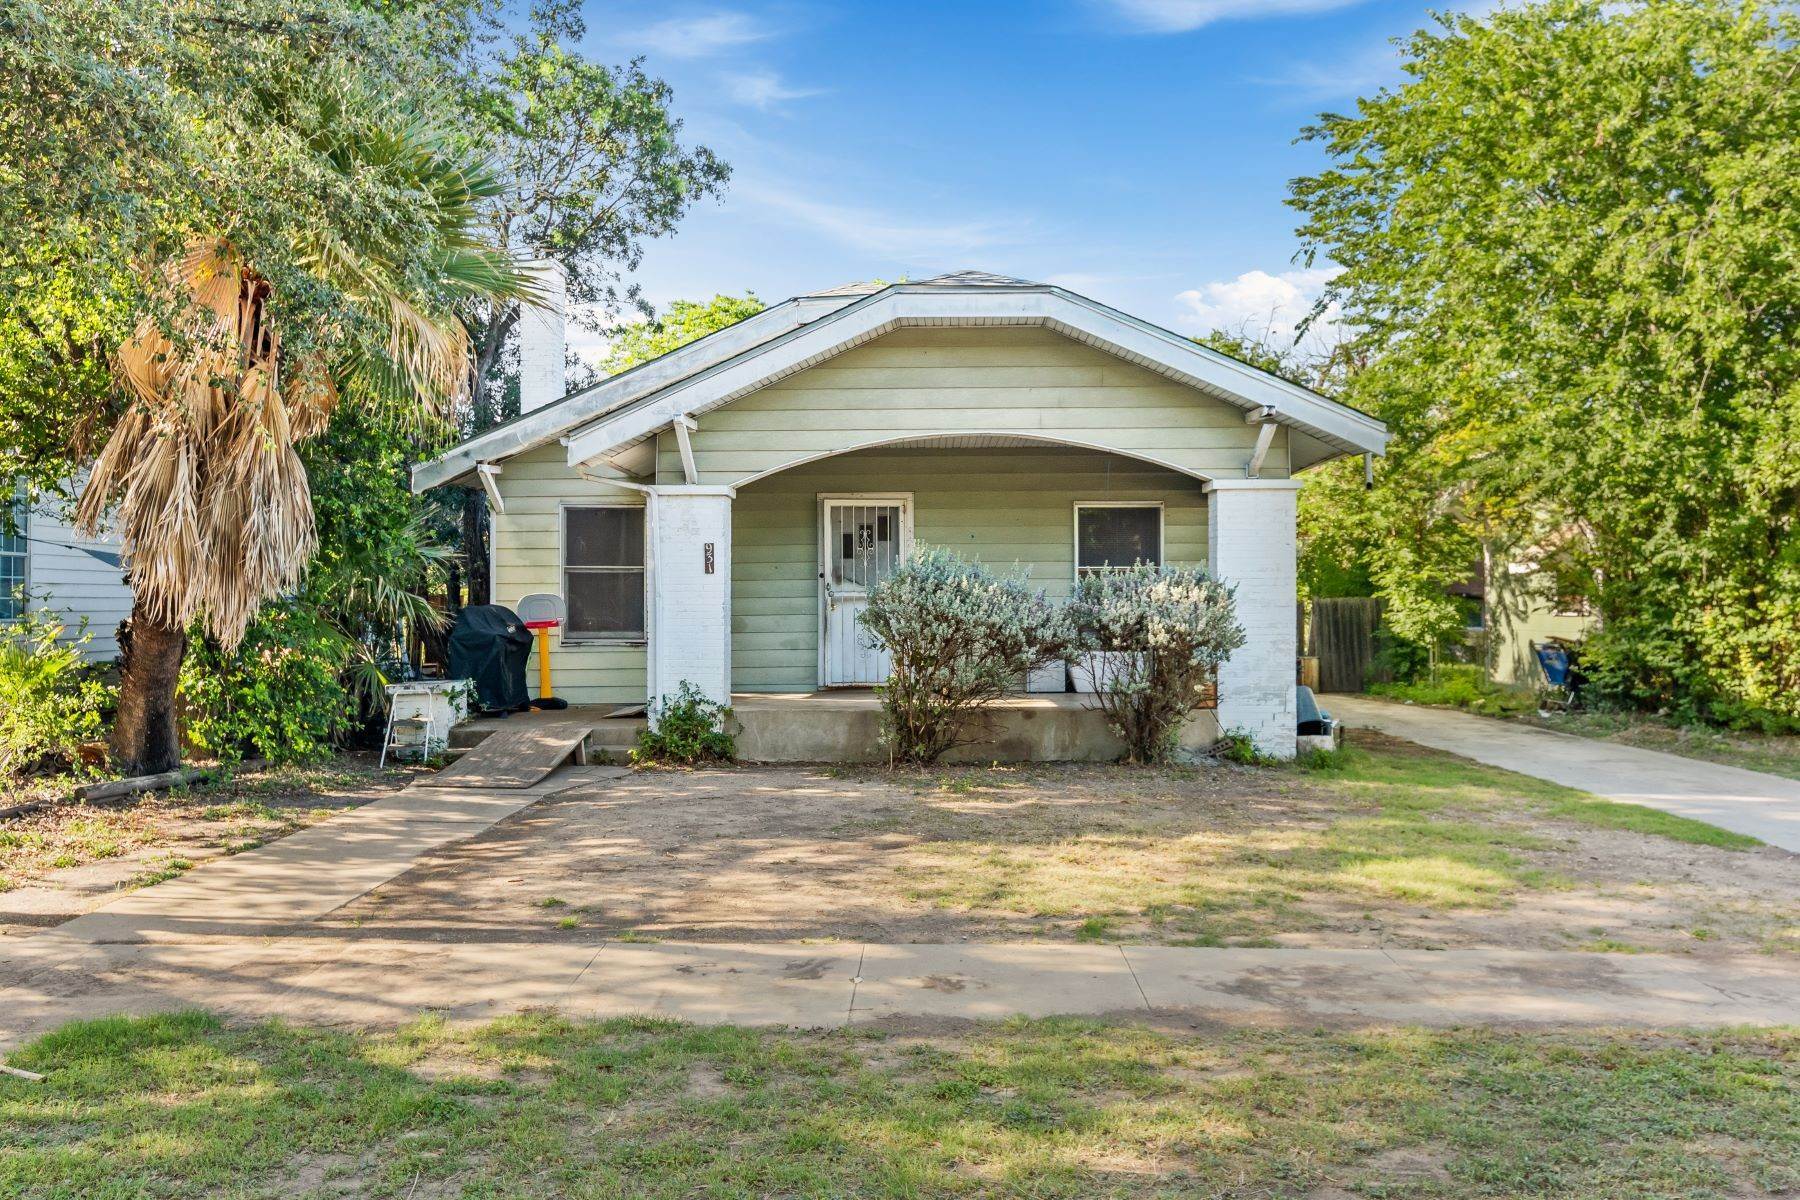 Single Family Homes for Sale at 931 West Kings Highway, San Antonio, TX 78201 931 West Kings Highway San Antonio, Texas 78201 United States